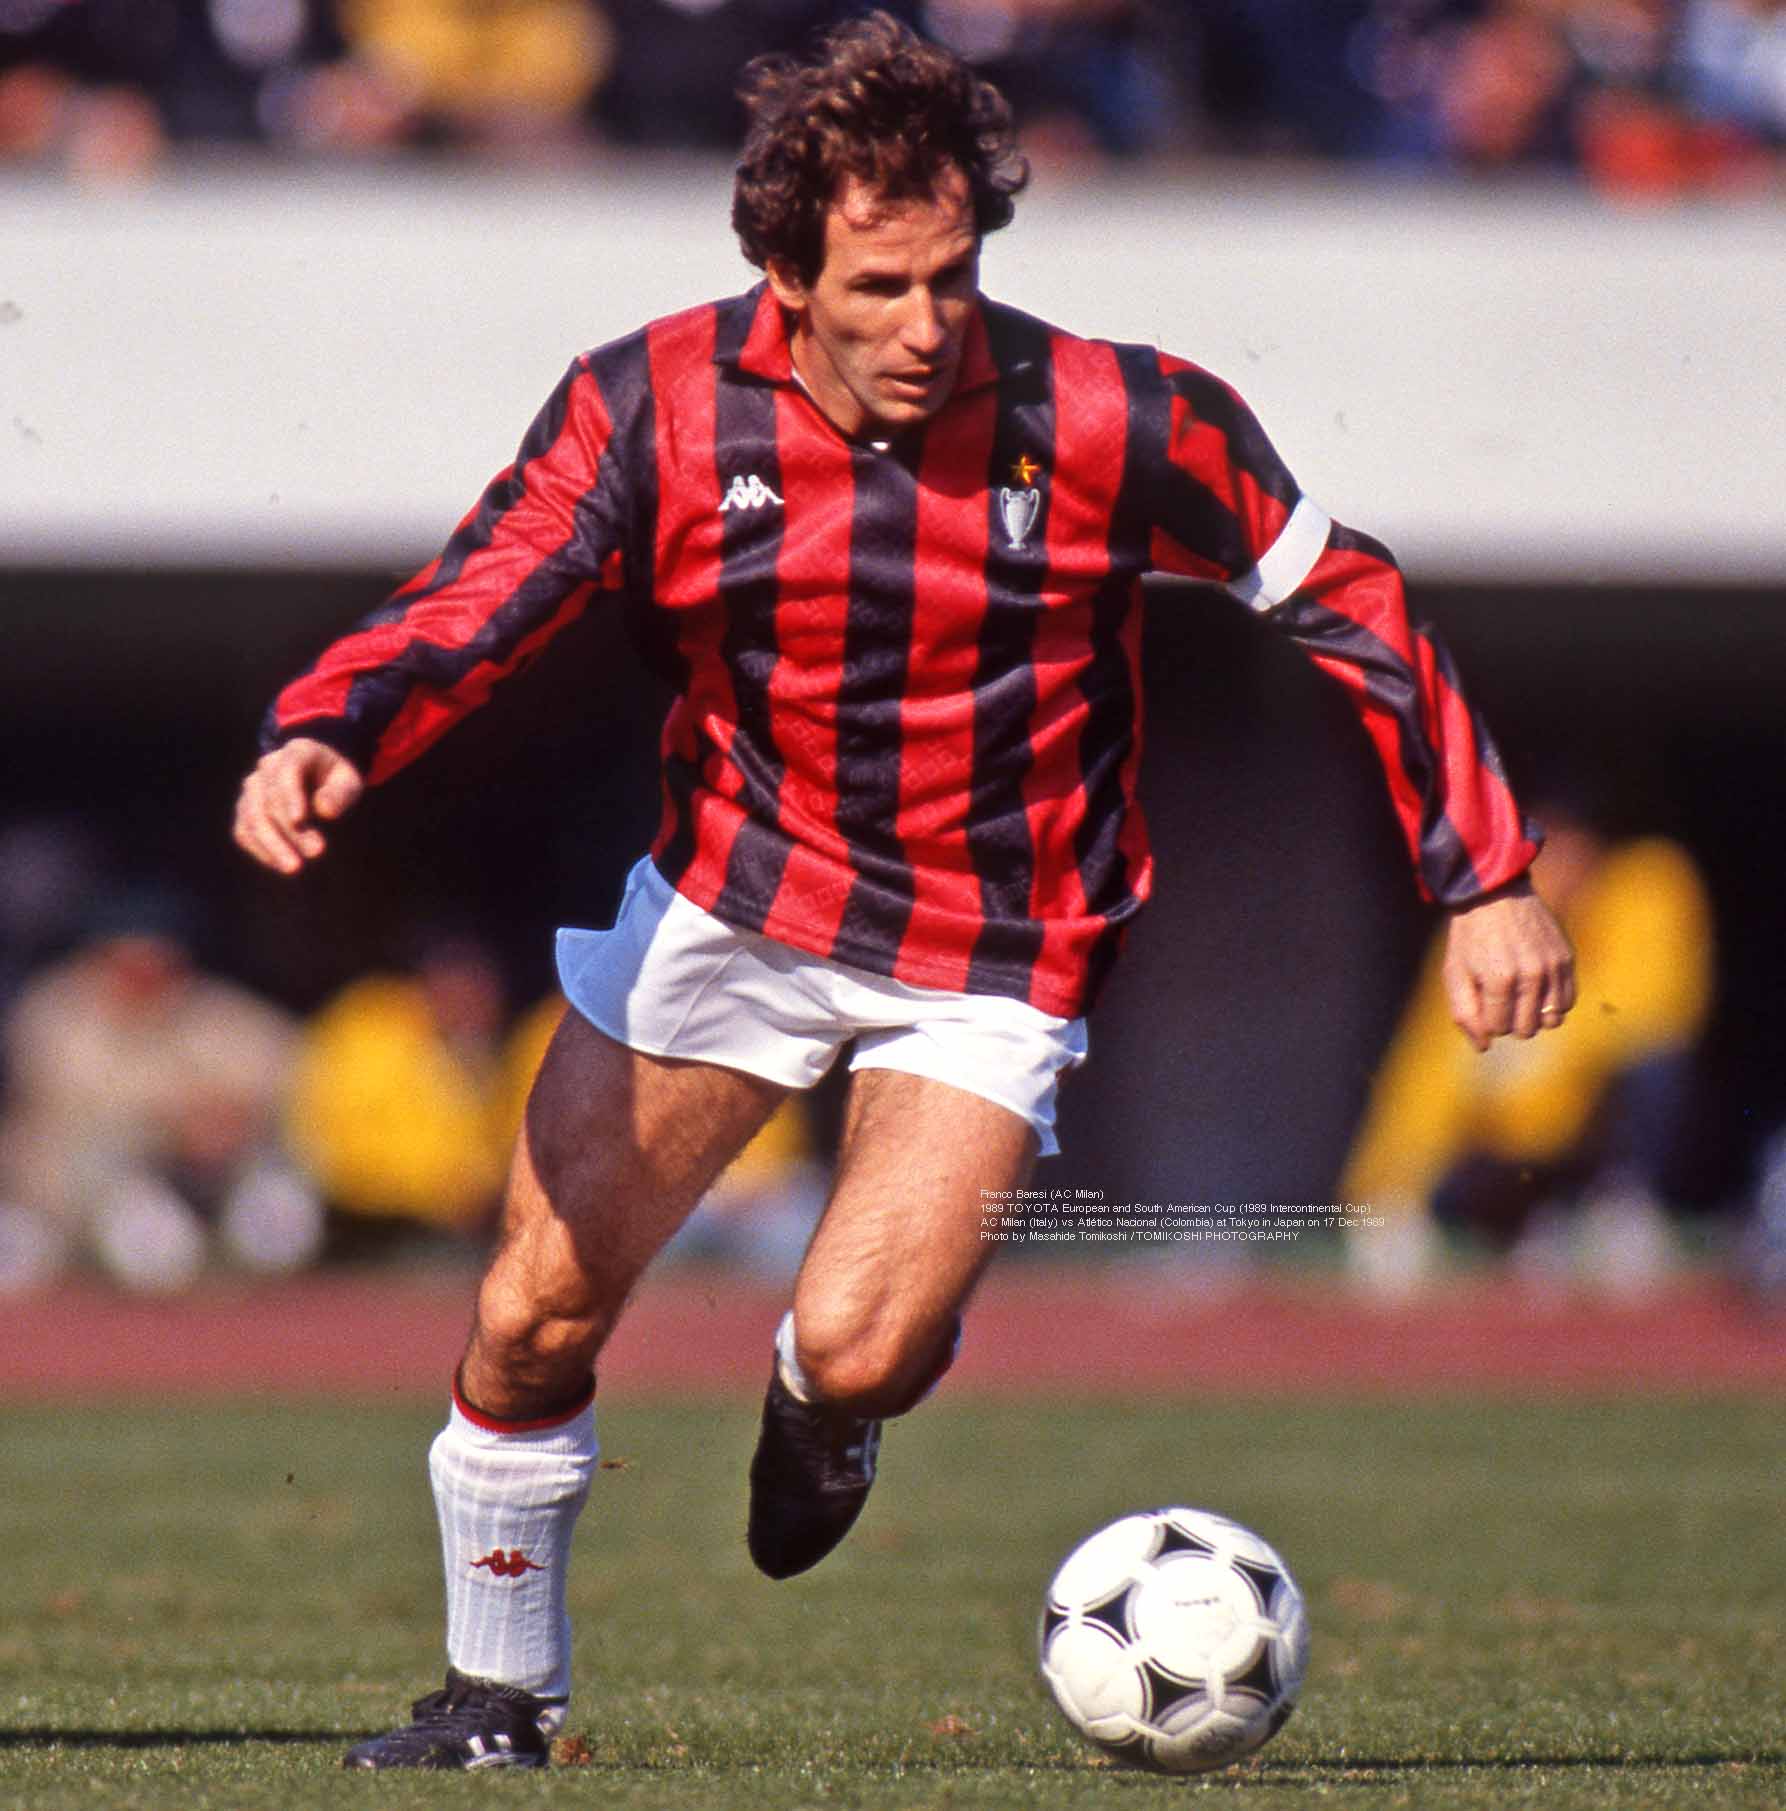 by Marty Fielding ebbe tidevand tphoto on Twitter: "Franco Baresi (AC Milan) 1989 TOYOTA European and South  American Cup (1989 Intercontinental Cup) AC Milan (Italy) vs Atlético  Nacional (Colombia) 1-0 at Tokyo in Japan on 17 Dec